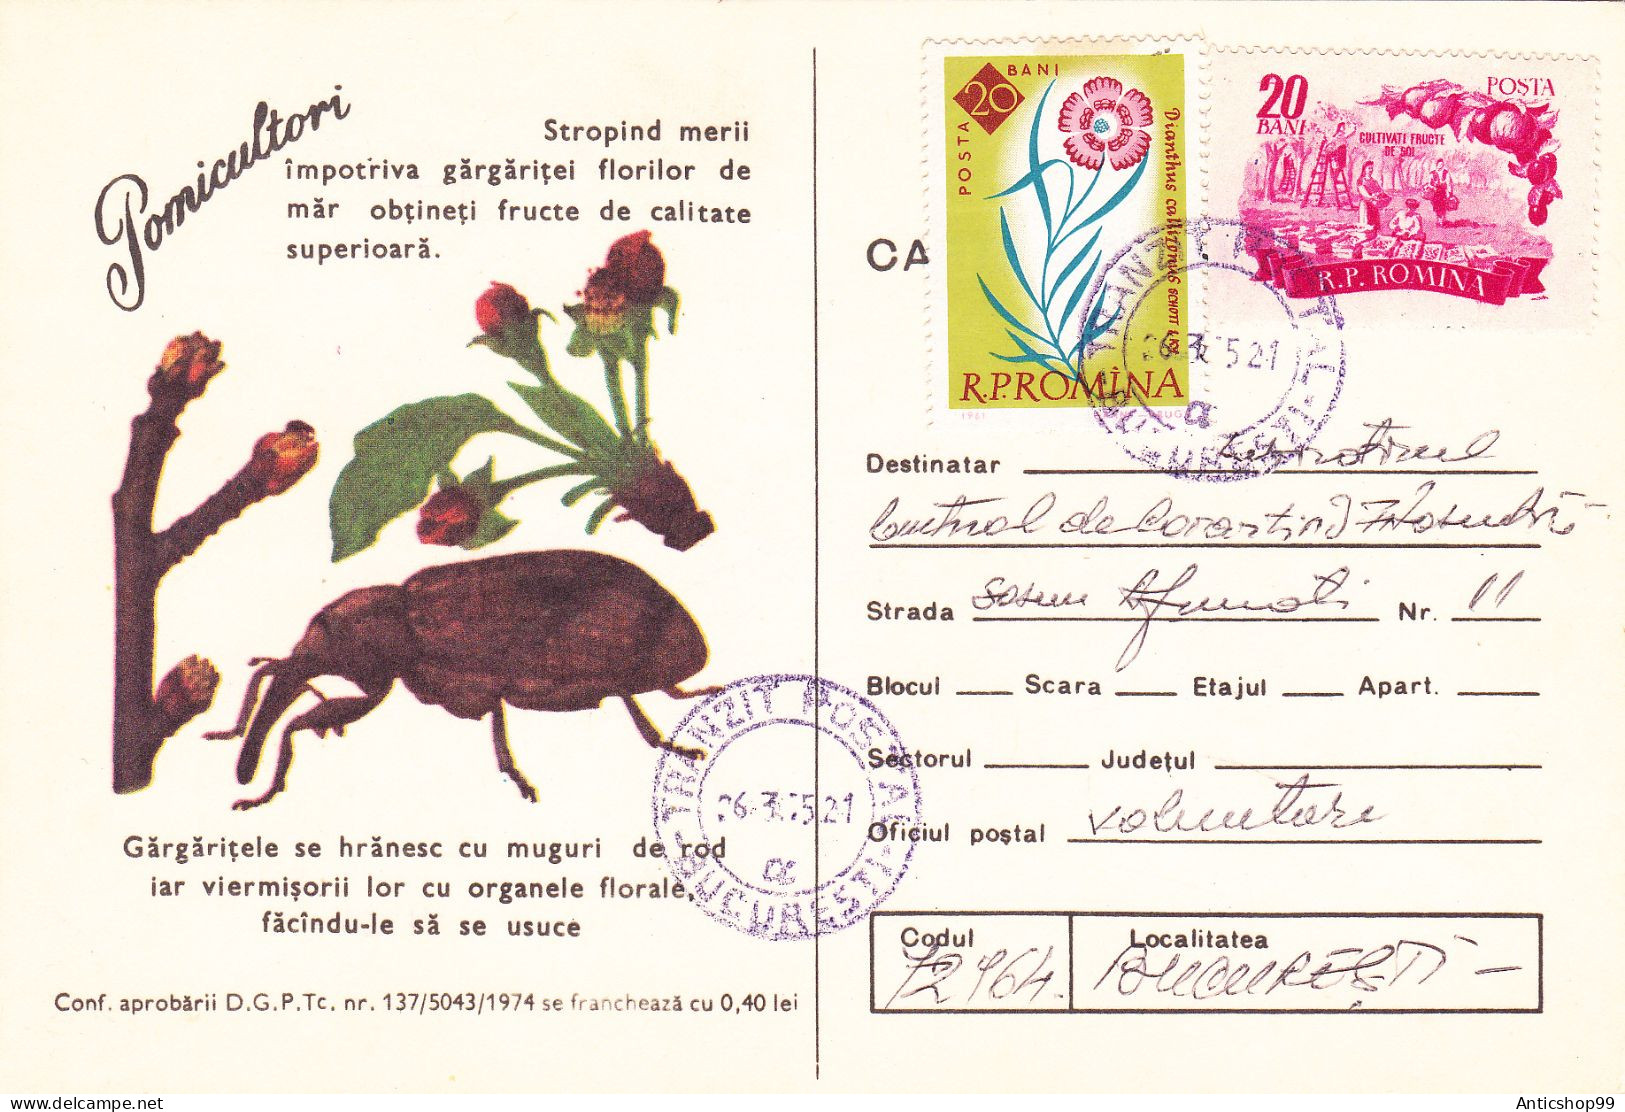 ADVERTISING THE FIGHTING OF PESTS,  UNUSED,  COD. 137/5043/74,  POST CARD STATIONERY   ROMANIA - Ganzsachen